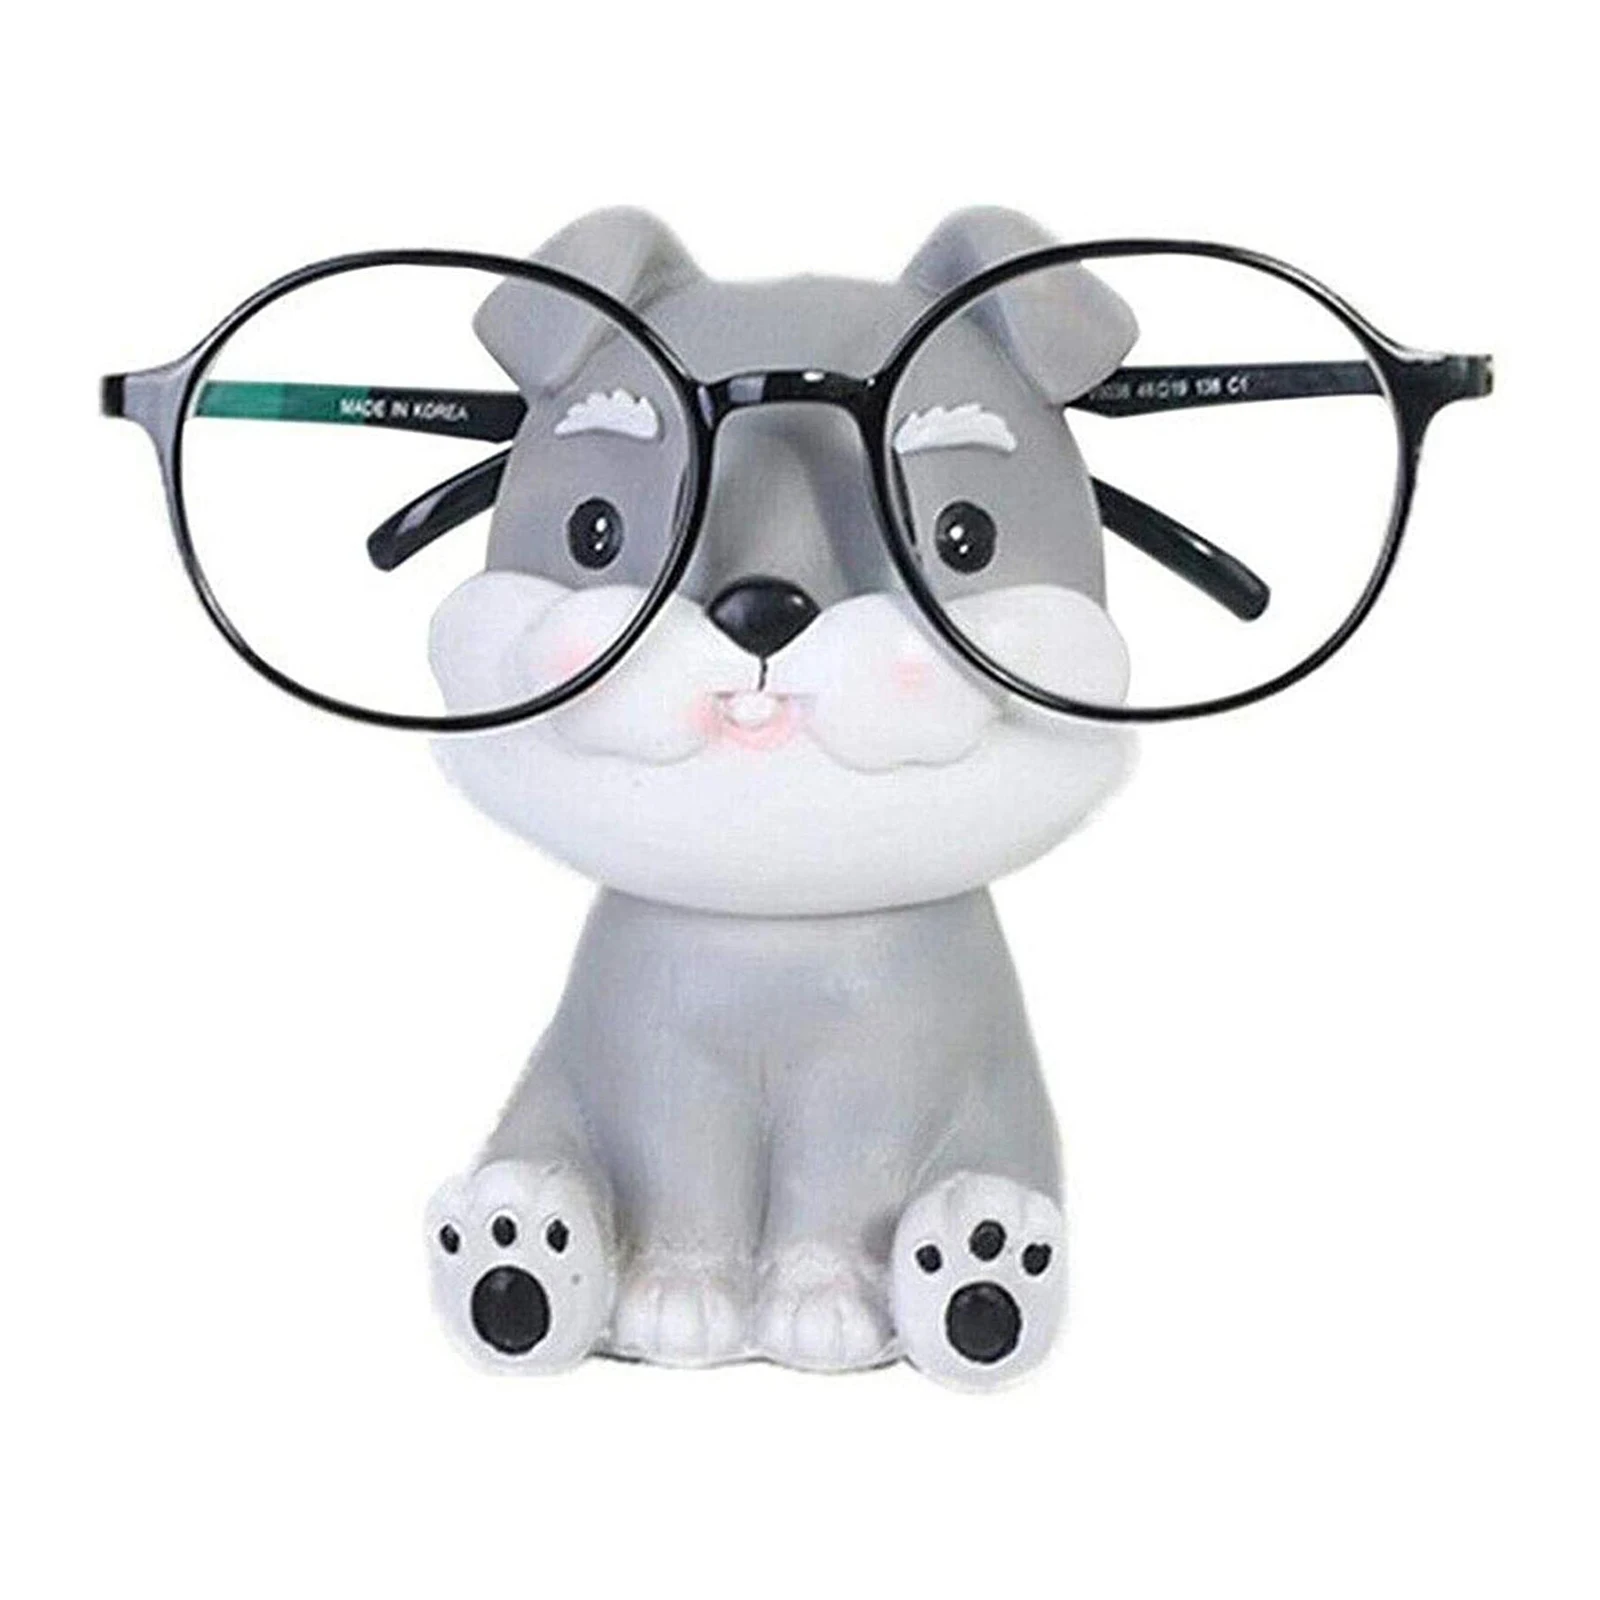 Novelty Dog Reading Glasses Holder Spectacle Eyeglasses Display Stand Gifts 3D Cute  Animal Sunglass Display Rack Shelf